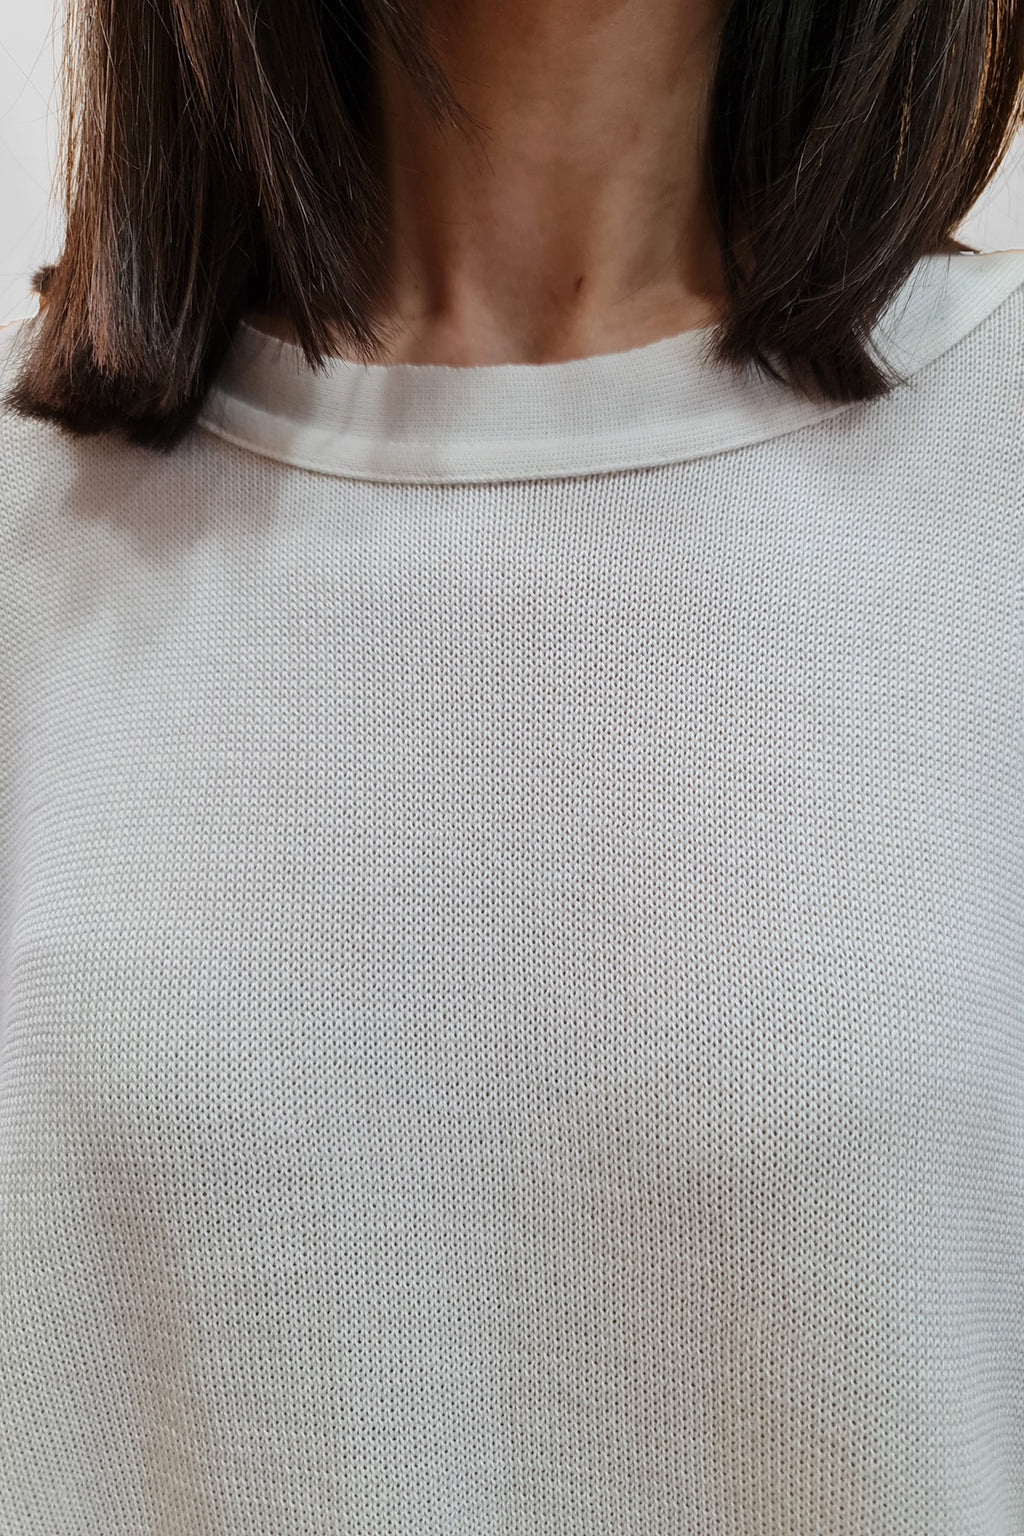 Close-up of a person wearing a white textured long-sleeve shirt